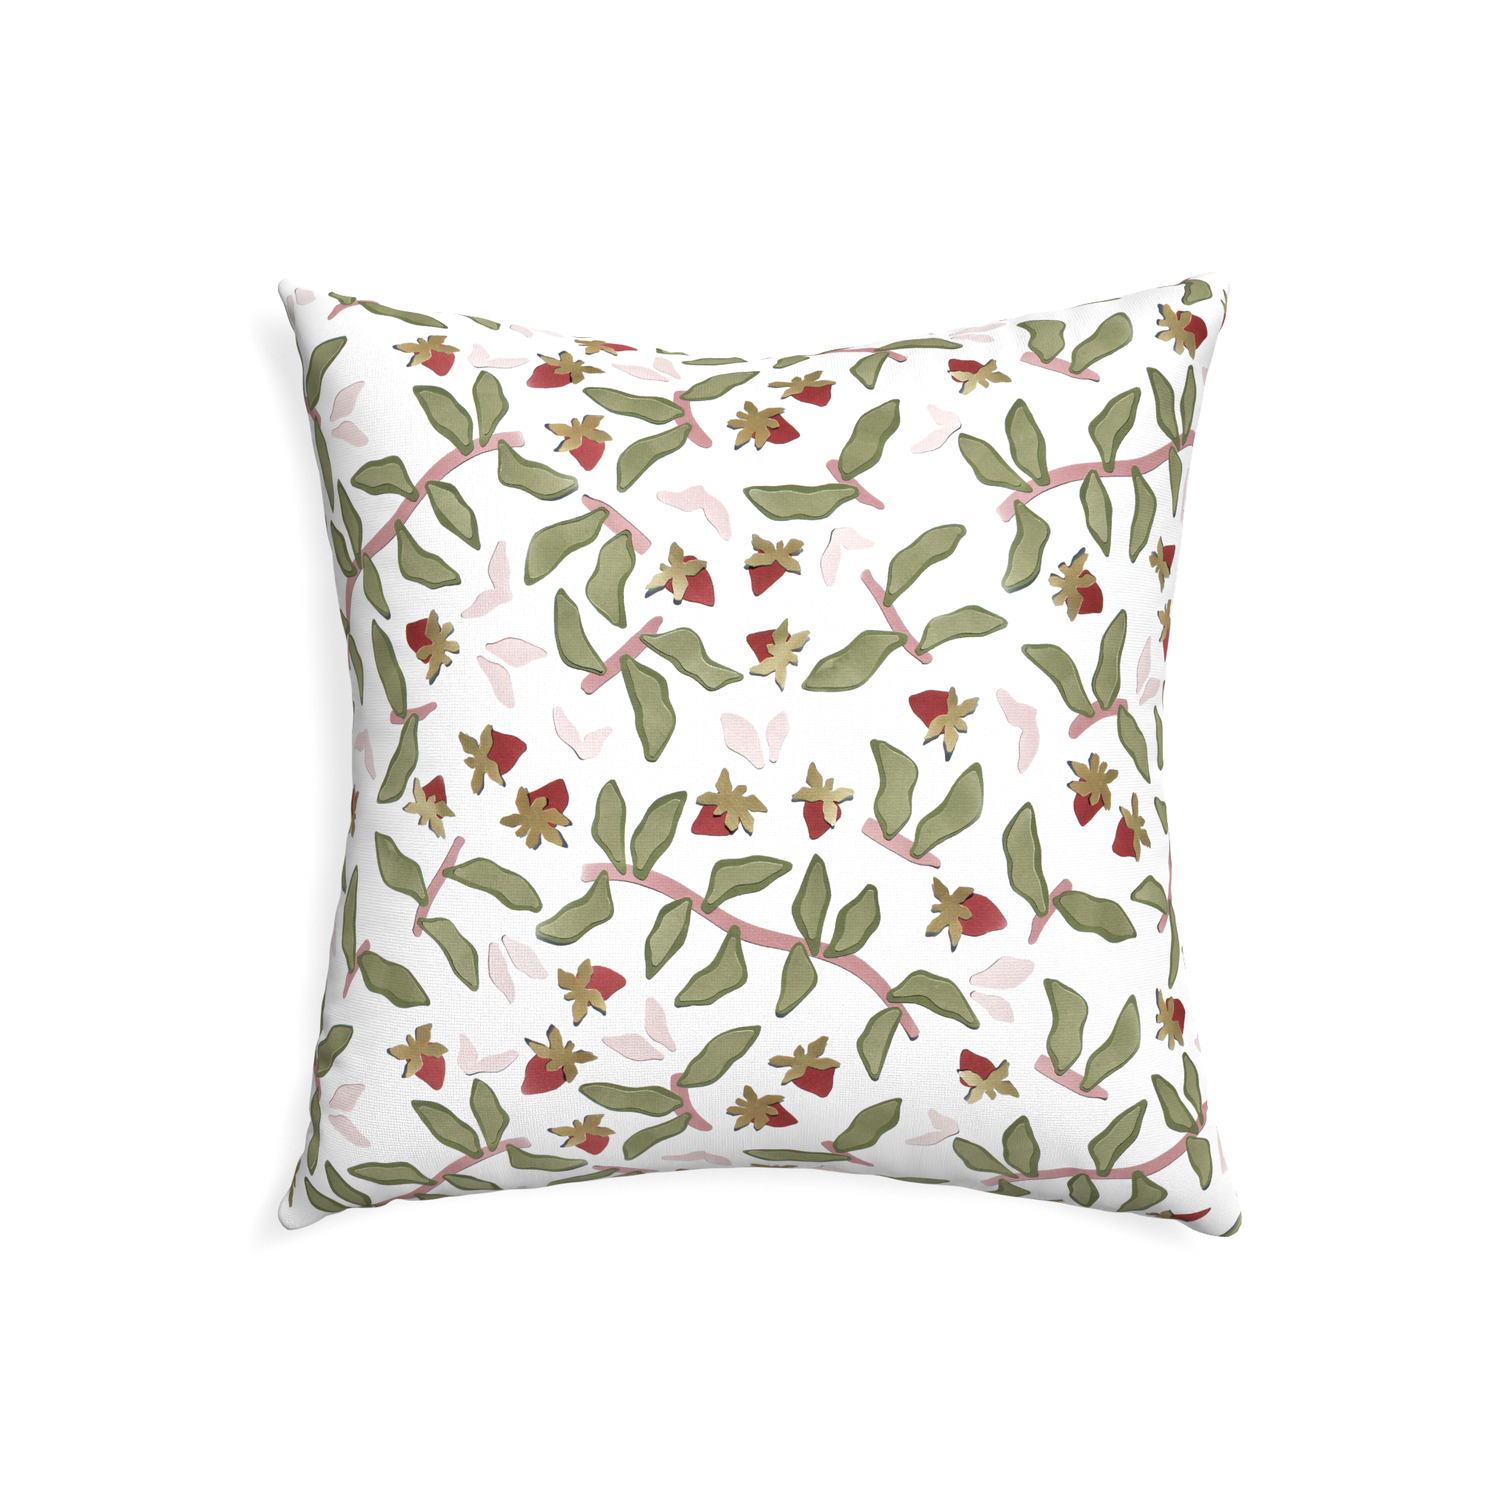 22-square nellie custom pillow with none on white background